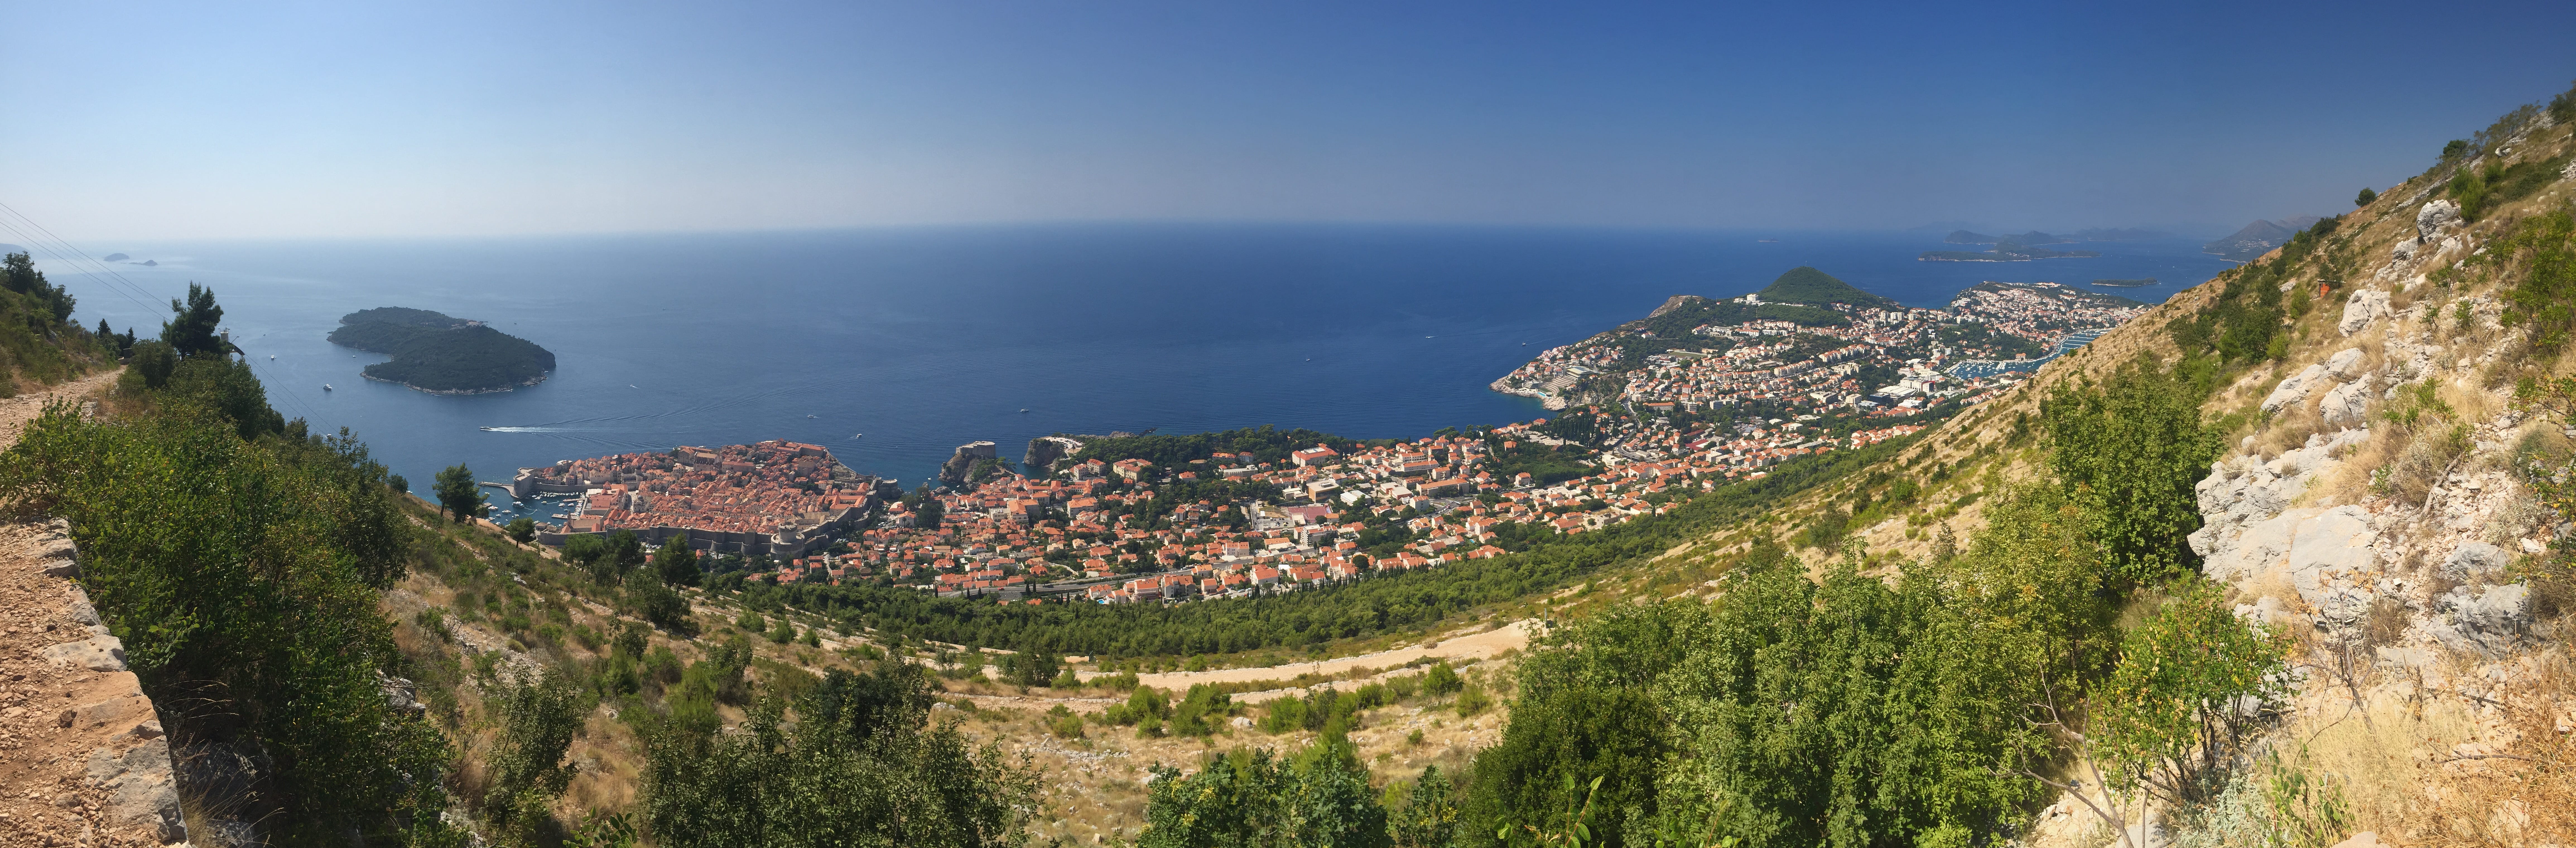 21 Notes Before You Visit Dubrovnik by Linzi Berry Medium pic